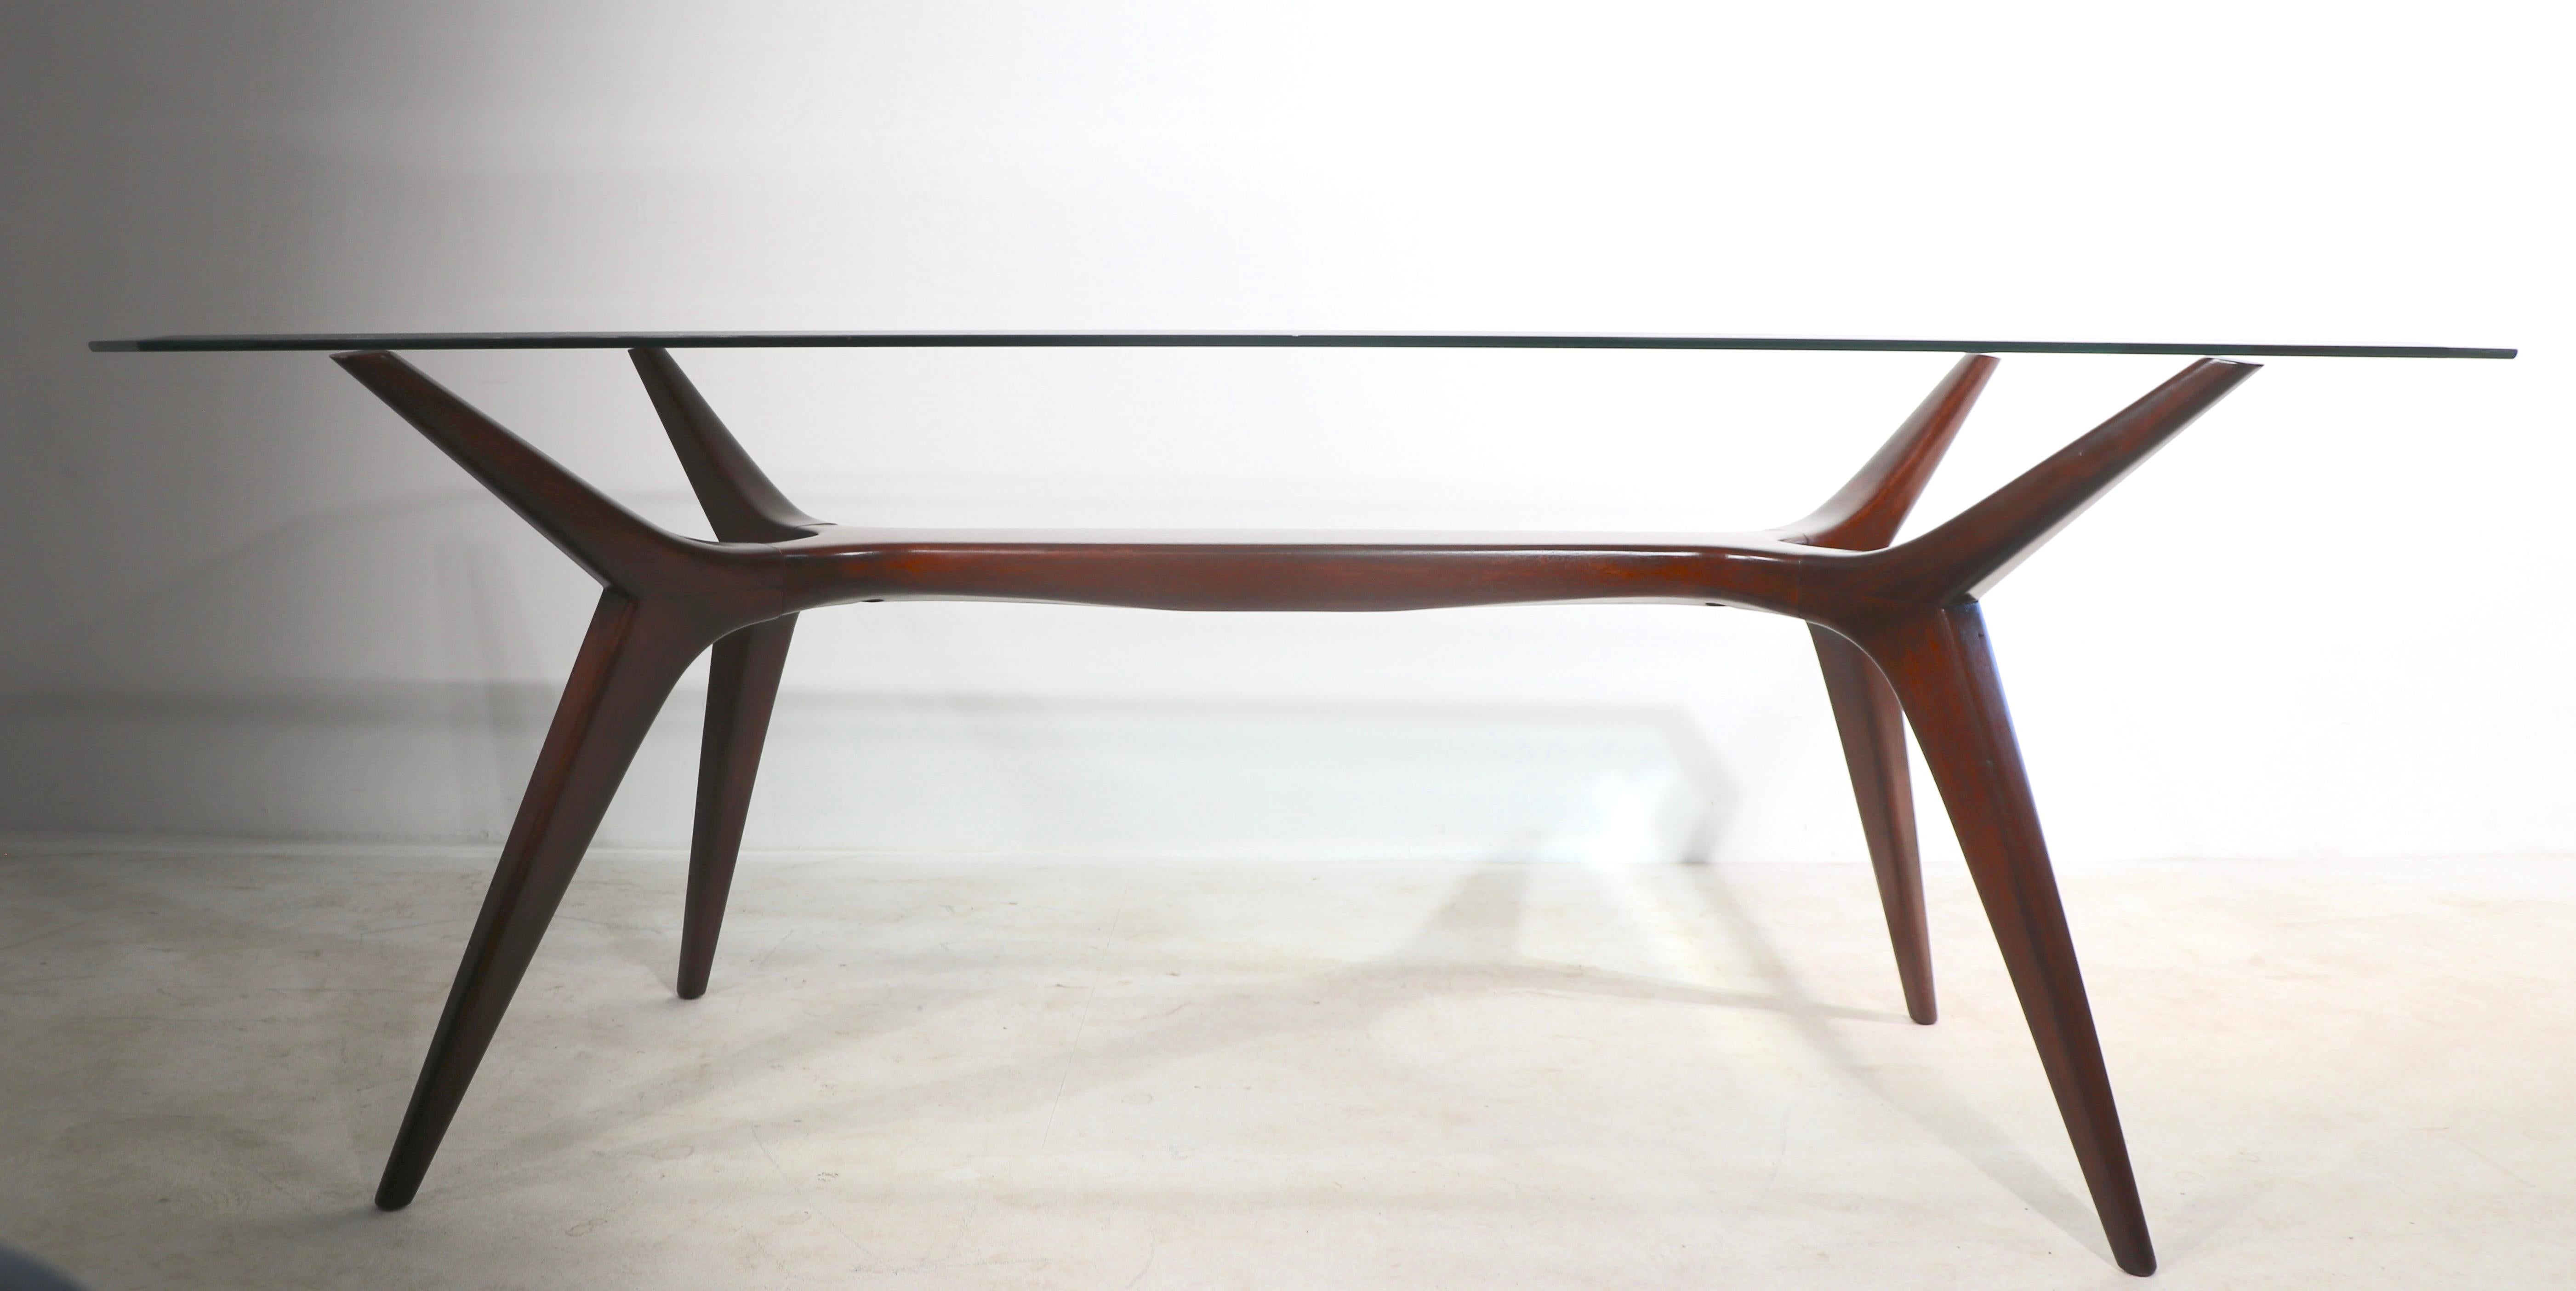 Rare sculptural dining table of cuban mahogany, and plate glass. The base is of solid Cuba mahogany, with a bevelled plate glass top. The wood base has been professionally refinished, the glass top is free of damage, but we are not convinced its is